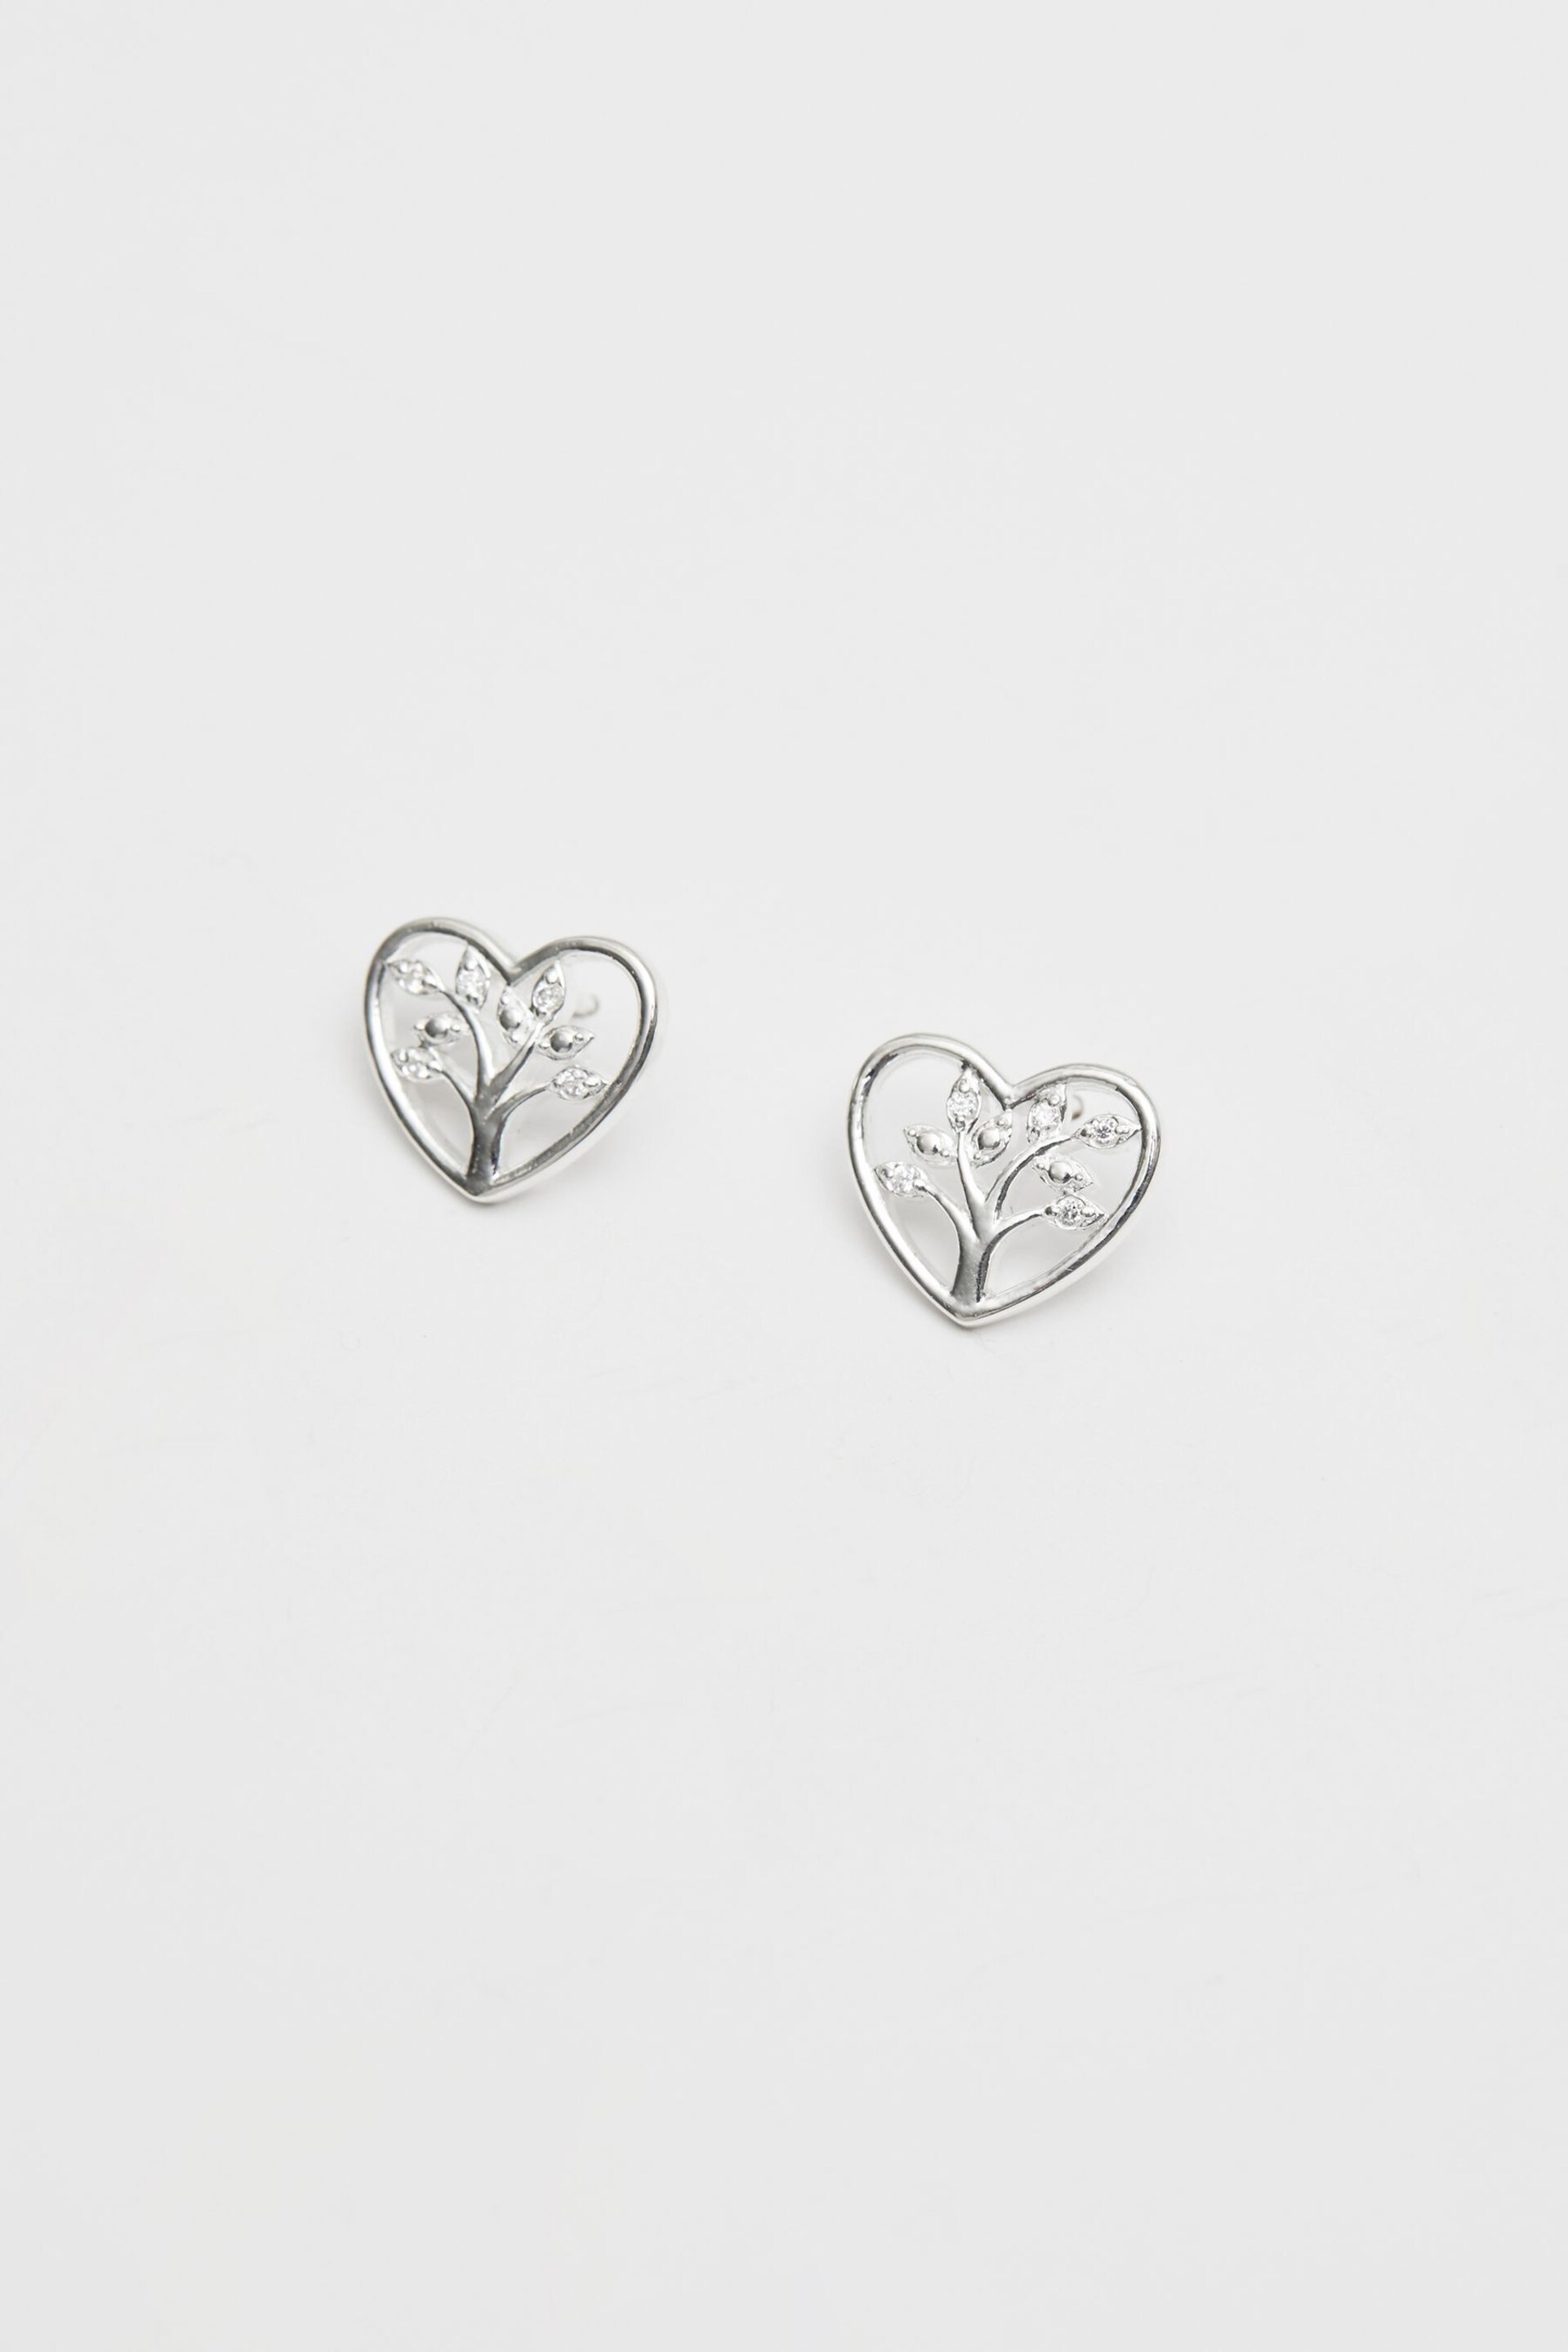 Simply Silver Sterling Silver Tone 925 Tree of Love Heart Stud Earrings - Image 1 of 2